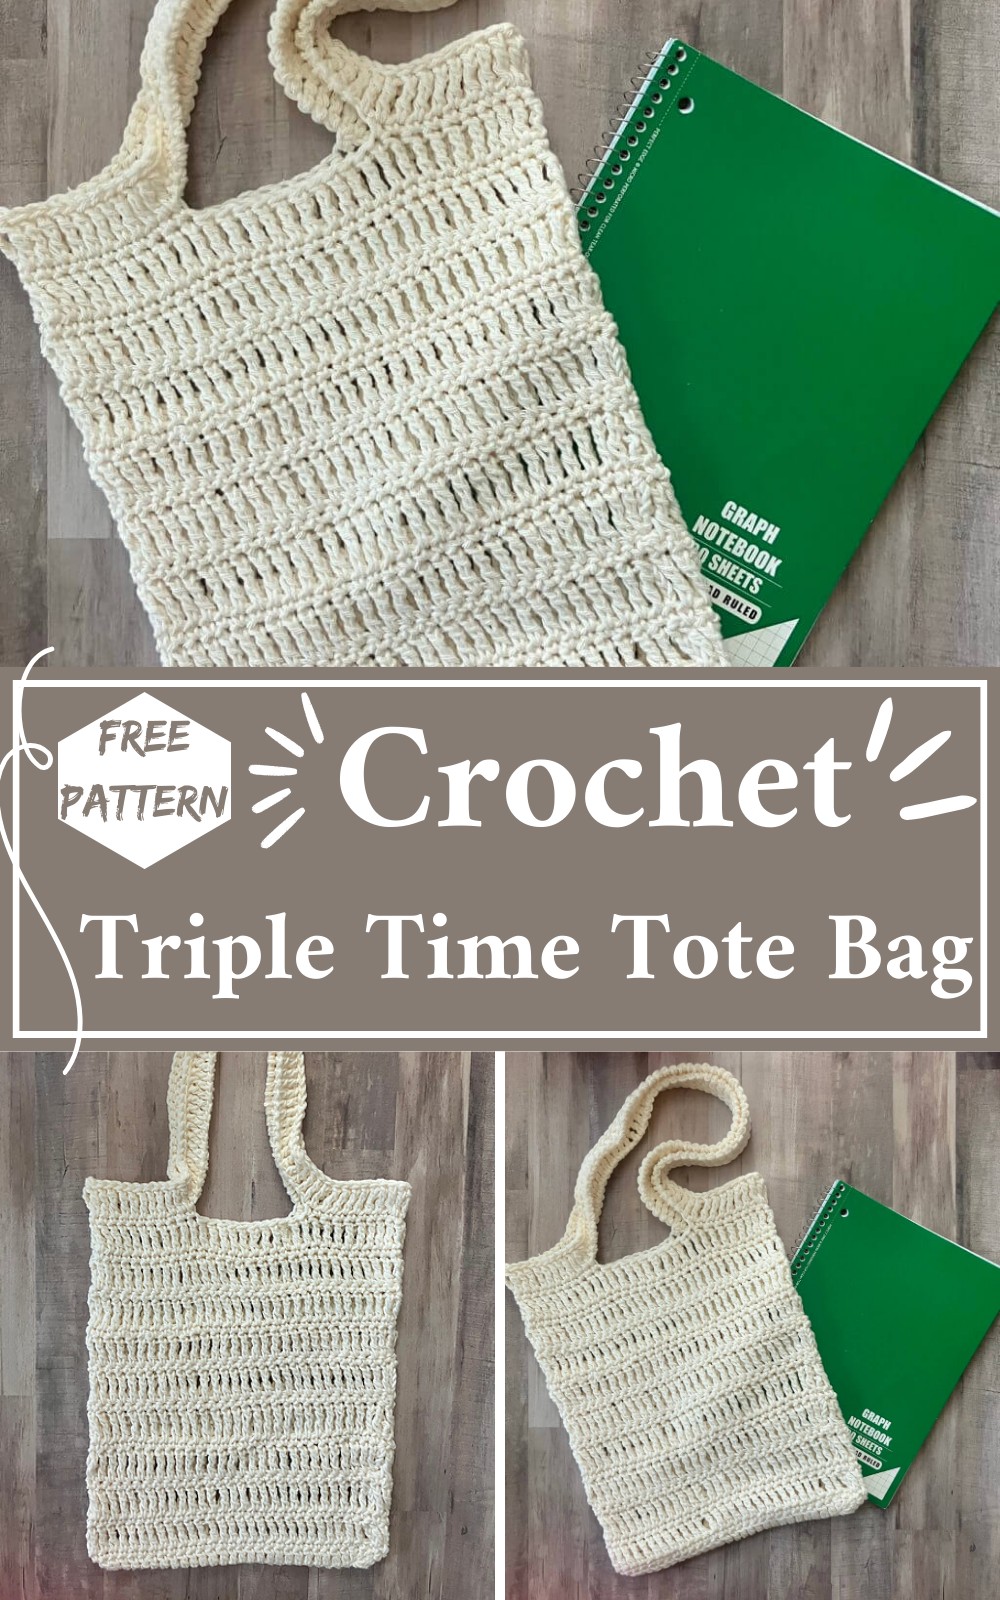 20 Modern Crochet Tote Bag Patterns For All Skill Levels!